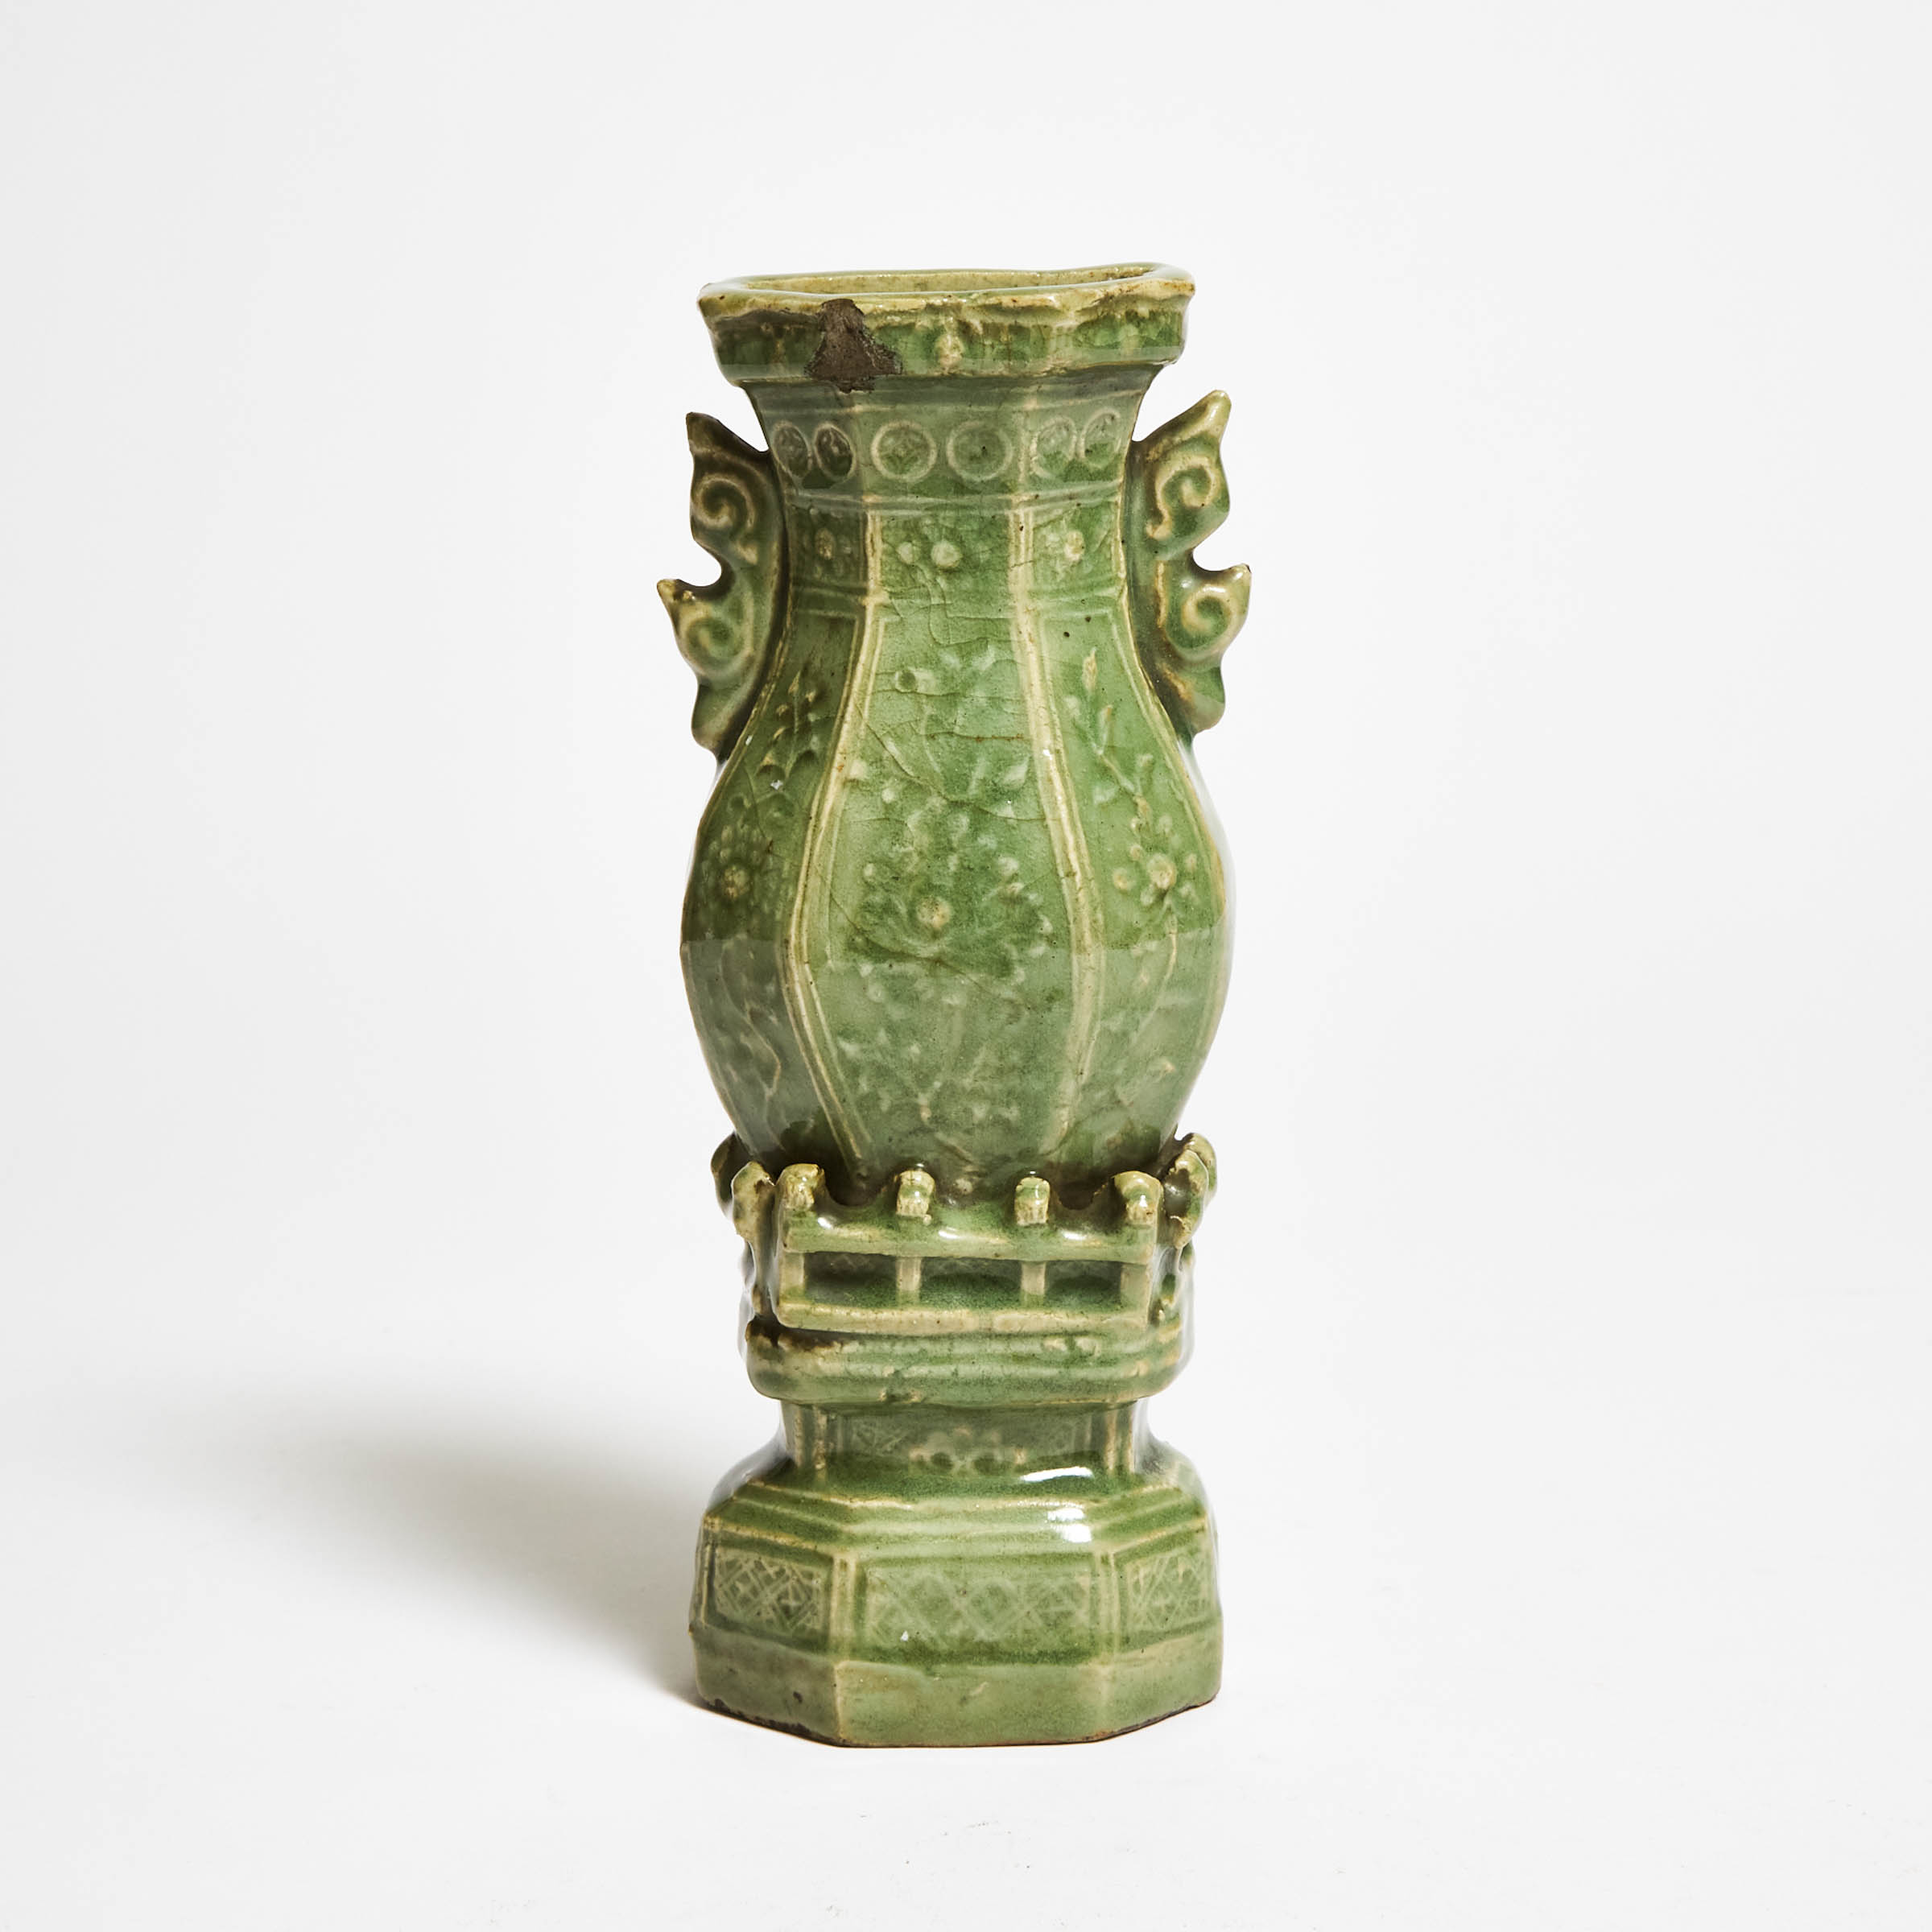 A Moulded Longquan Celadon Wall Vase, Ming Dynasty (1368-1644)